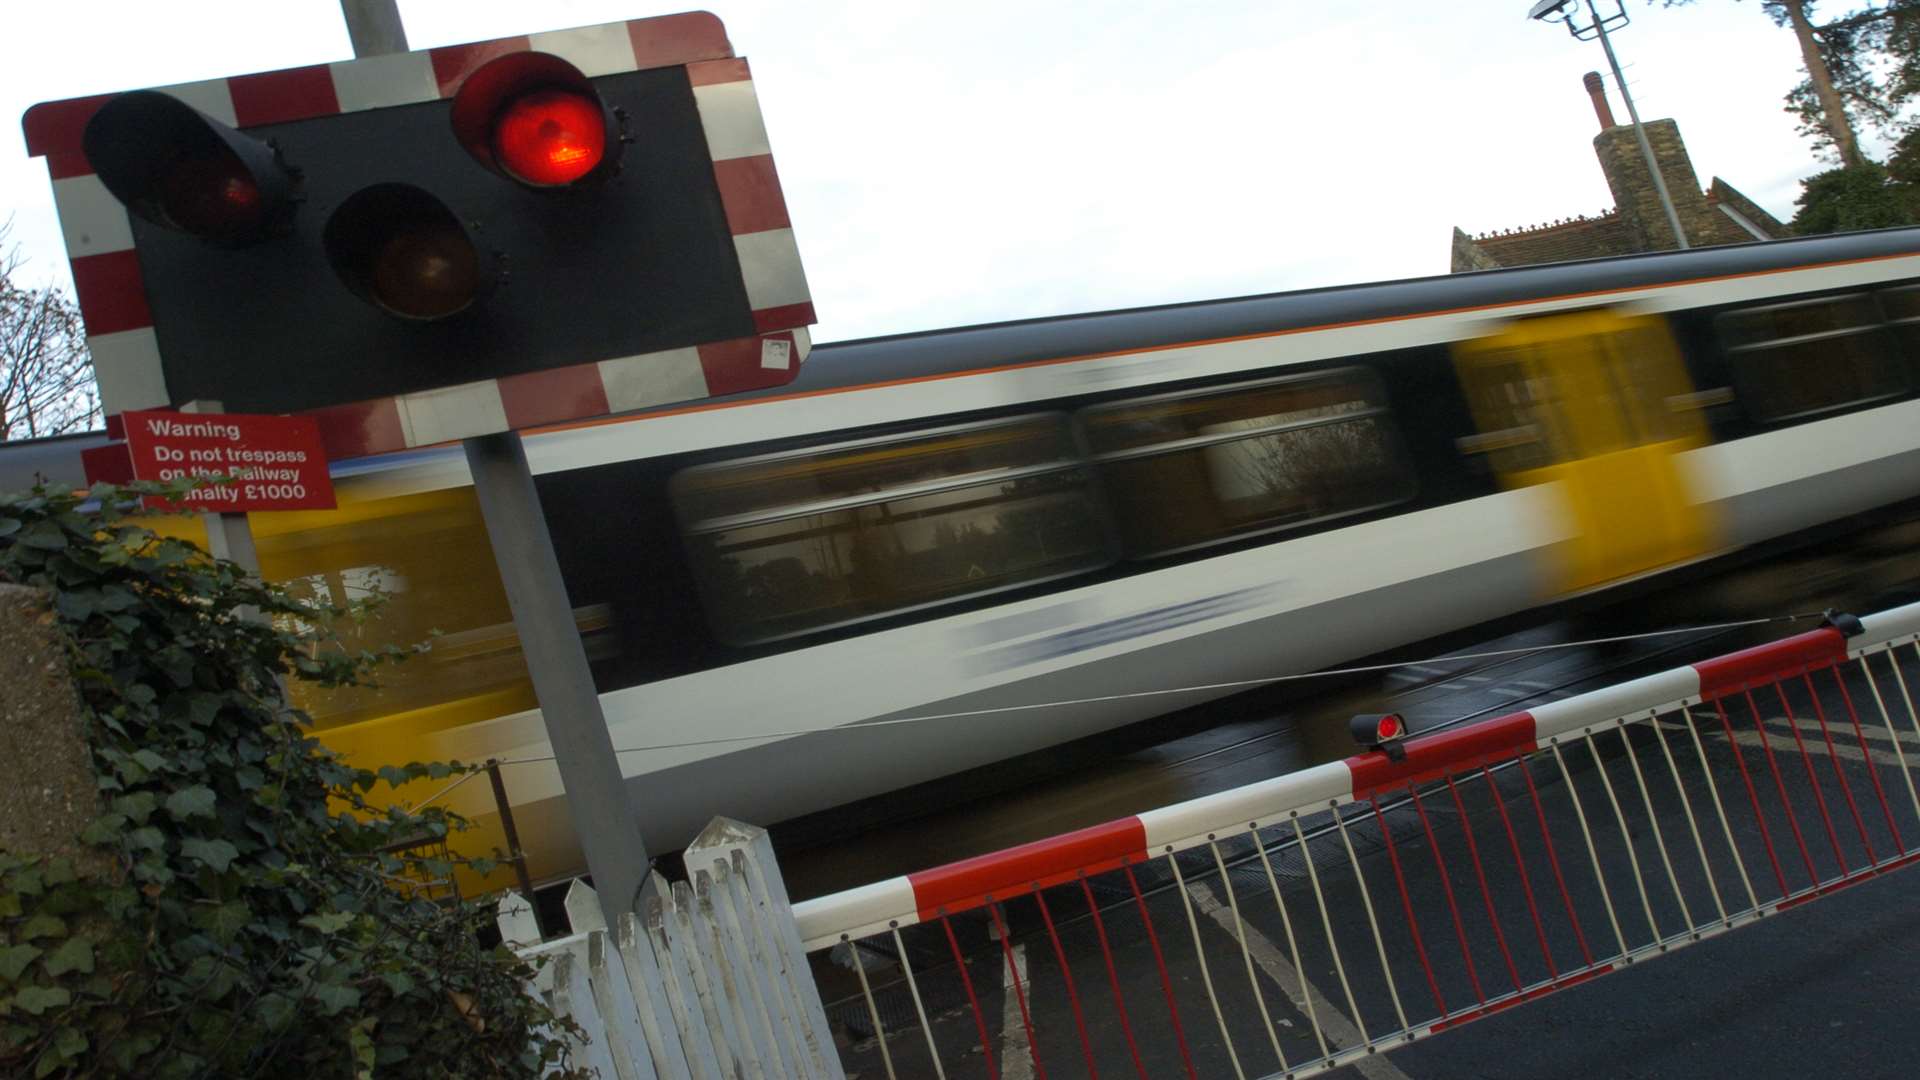 The level crossing at Station Road, Aylesford